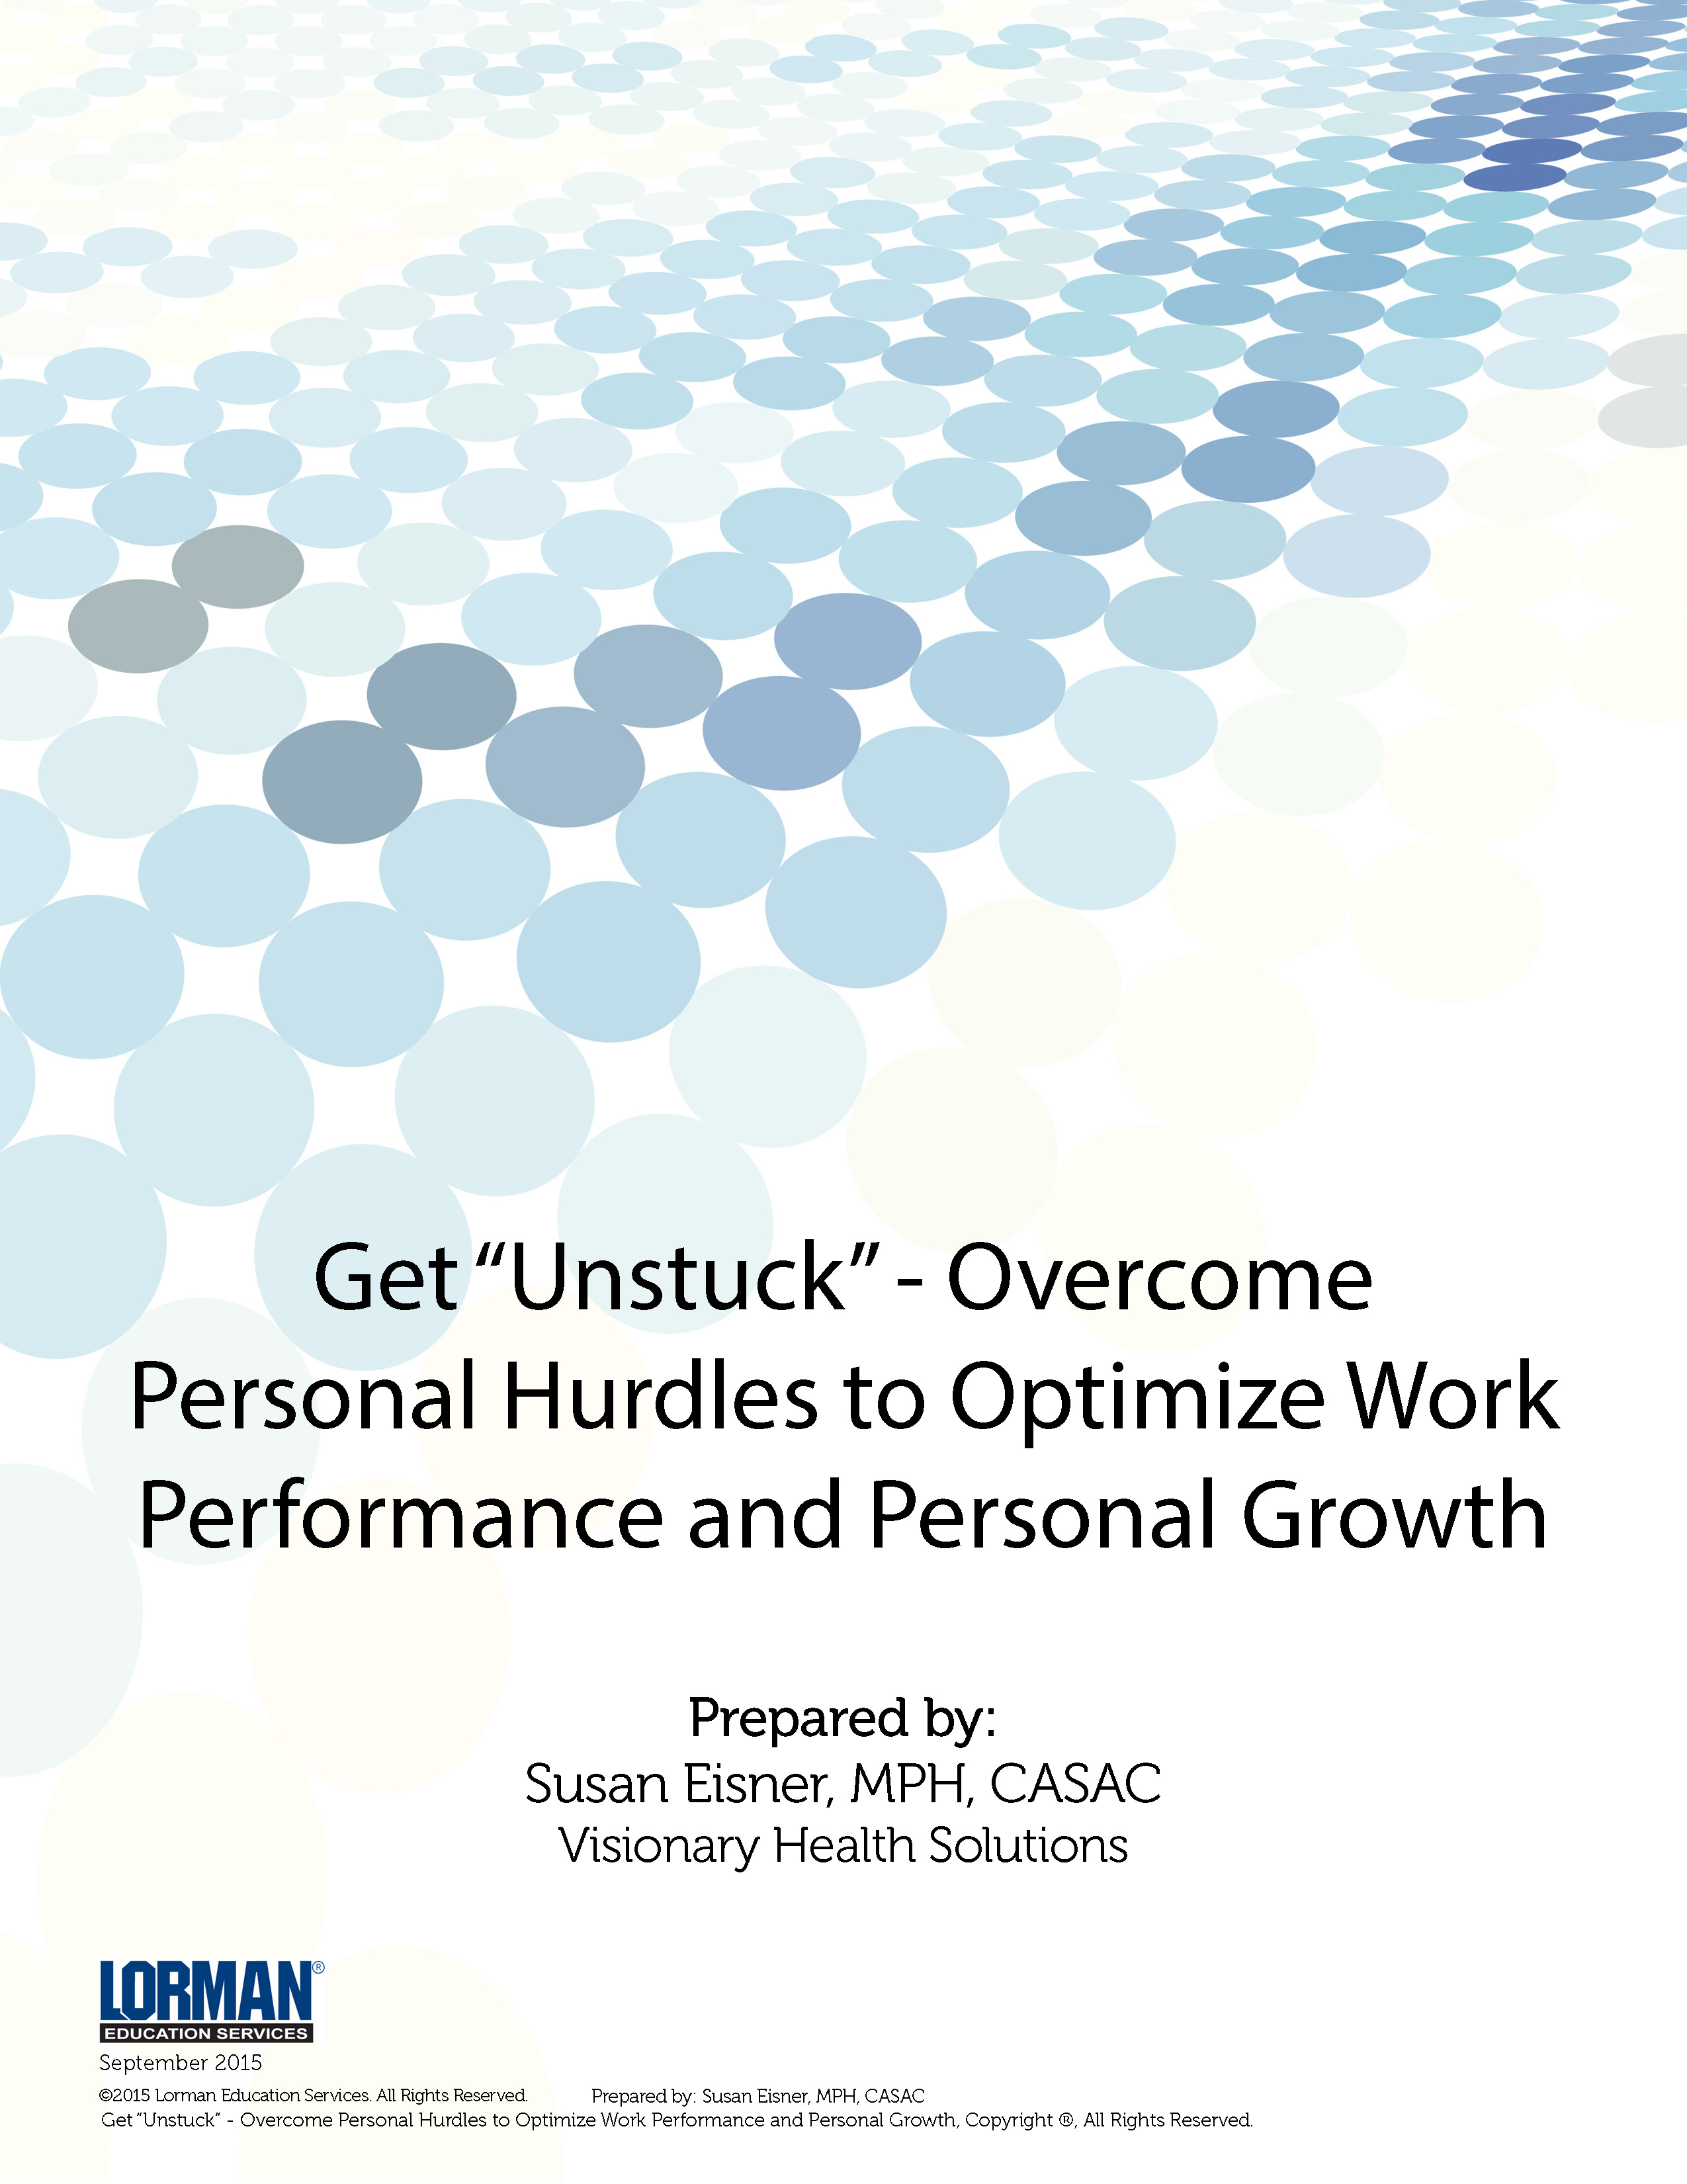 Get “Unstuck” - Overcome Personal Hurdles to Optimize Work Performance and Personal Growth